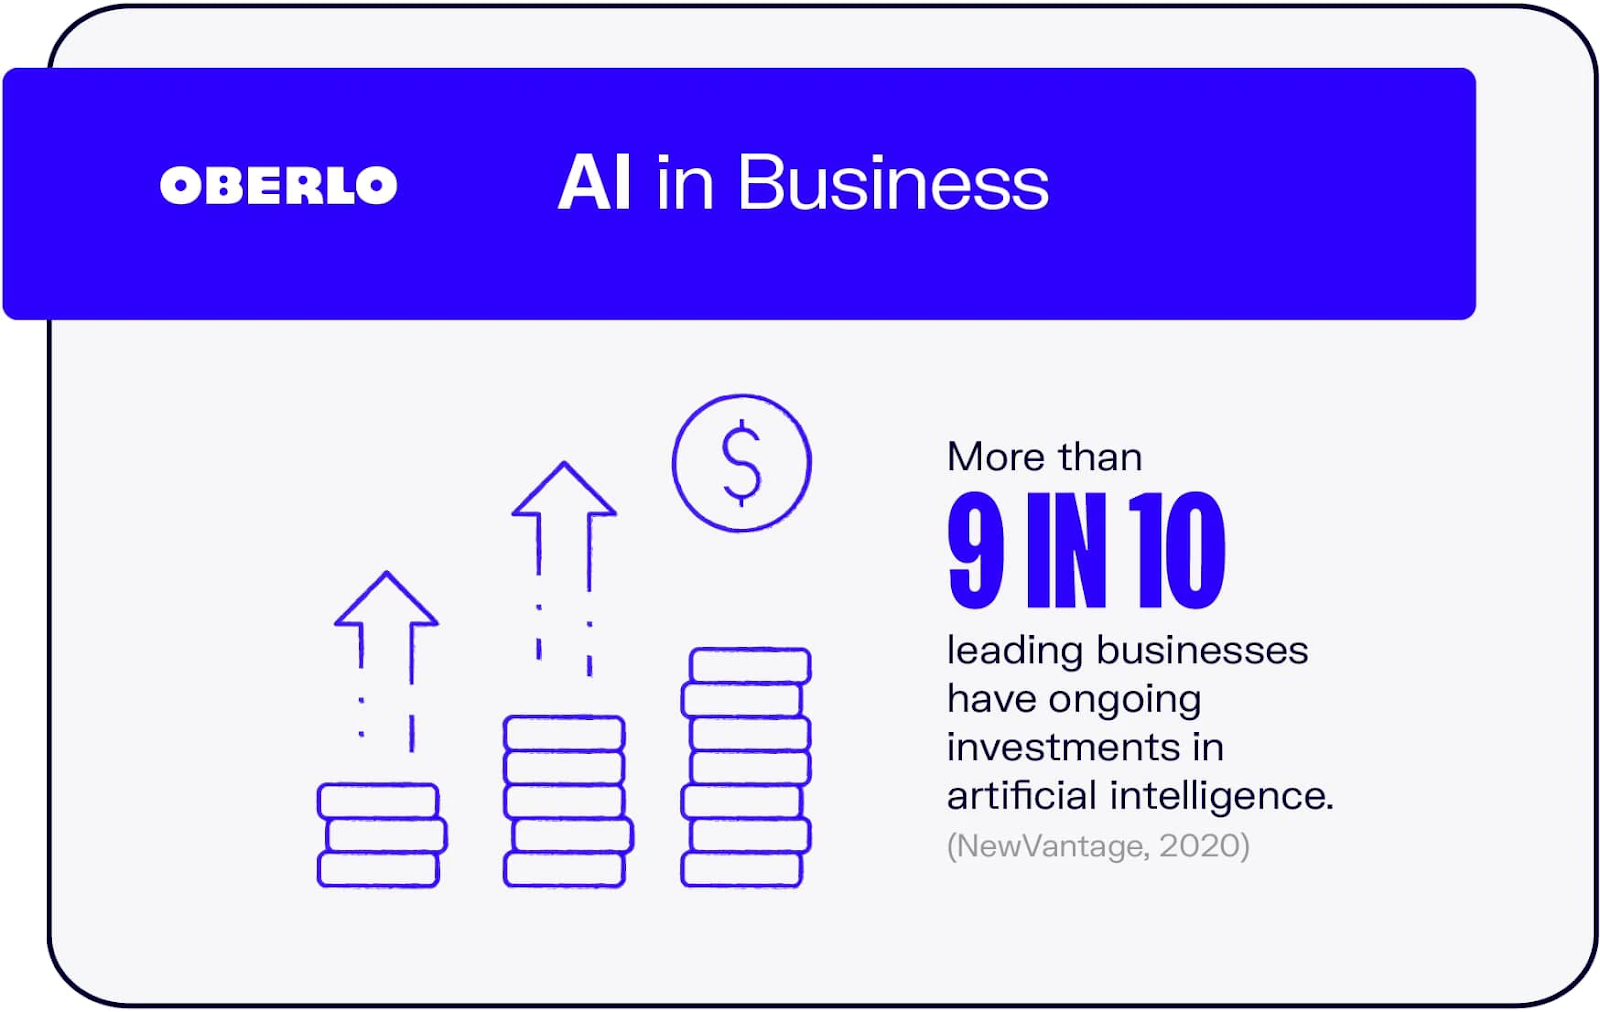 An infographic showing the ratio of businesses investmenting in AI.